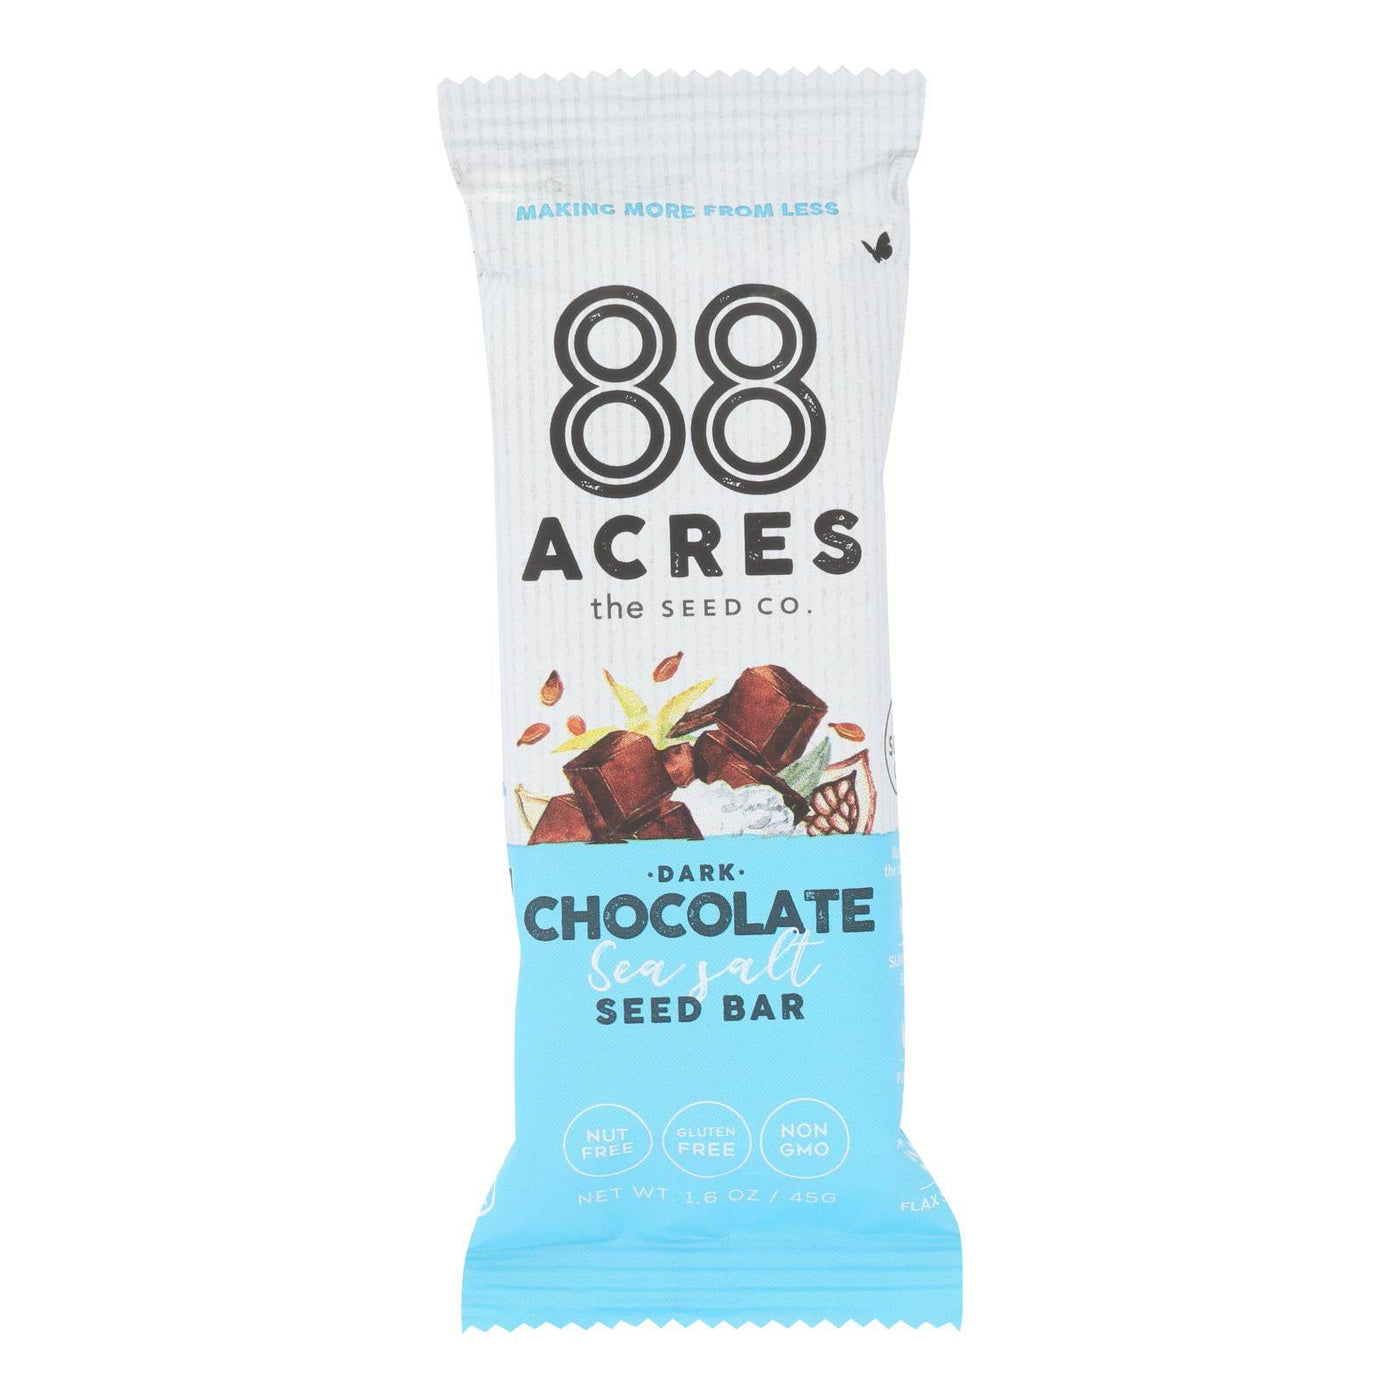 Buy 88 Acres - Bars - Chocolate And Sea Salt - Case Of 9 - 1.6 Oz.  at OnlyNaturals.us